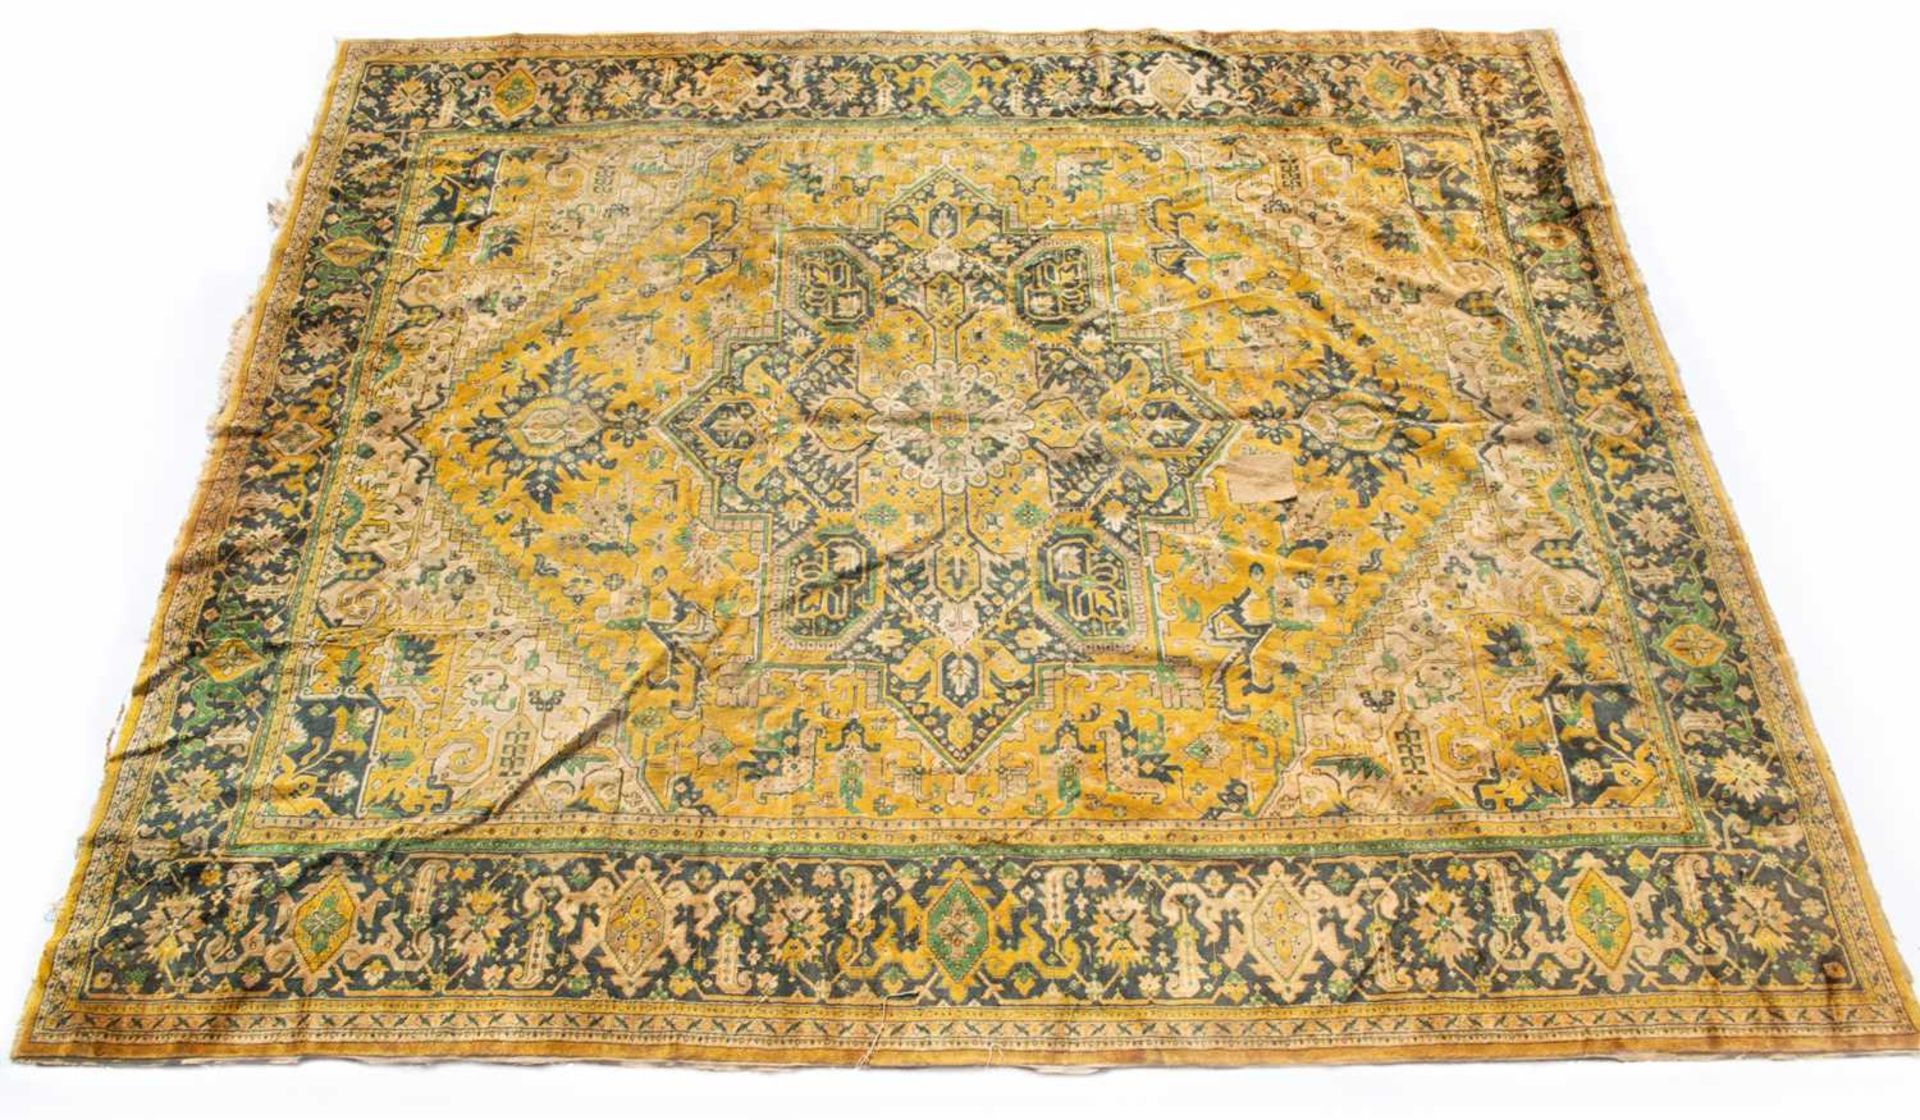 A modern 20th century blue and yellow ground small carpet, decorated with geometric designs within a